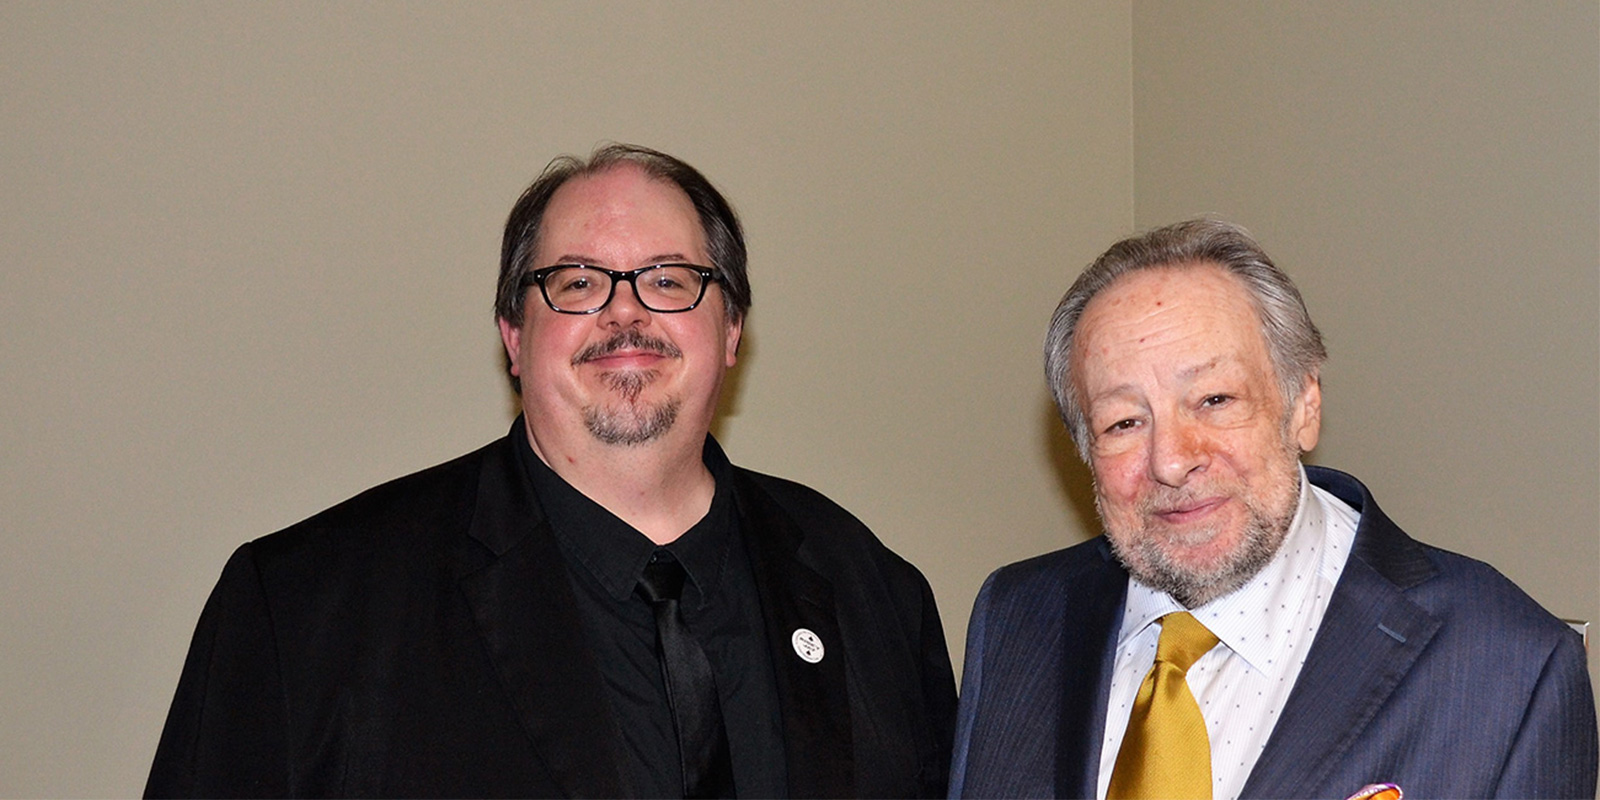 H. Peter Steeves and Ricky Jay